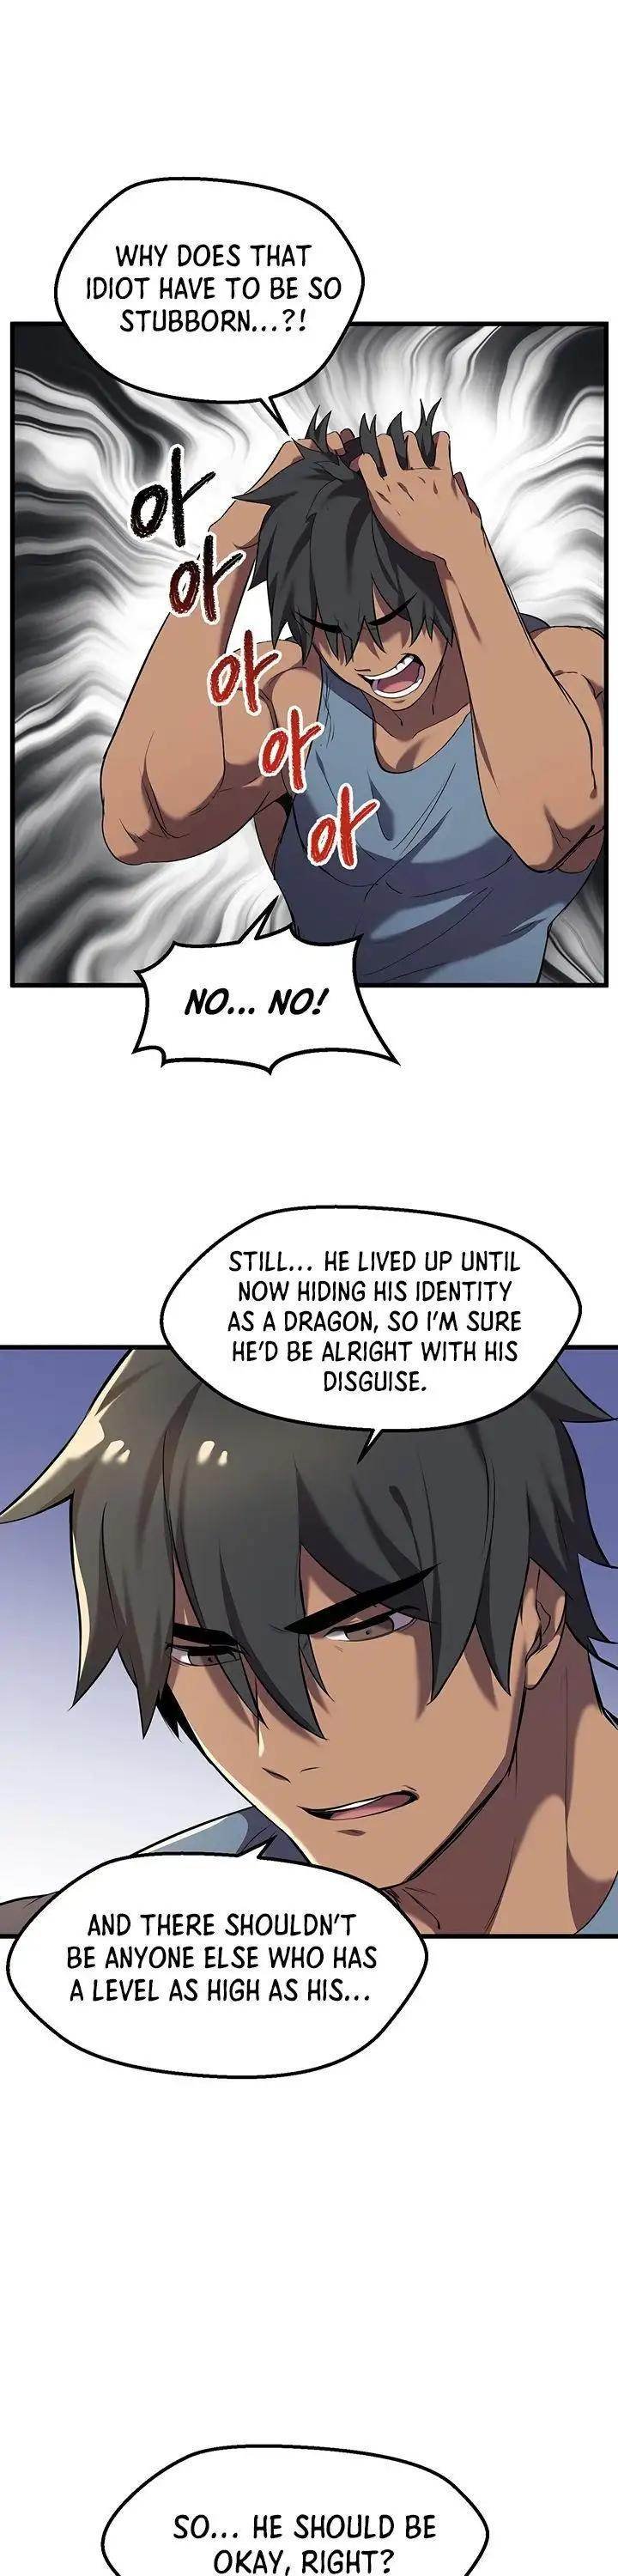 survival-story-of-a-sword-king-in-a-fantasy-world-chap-33-11